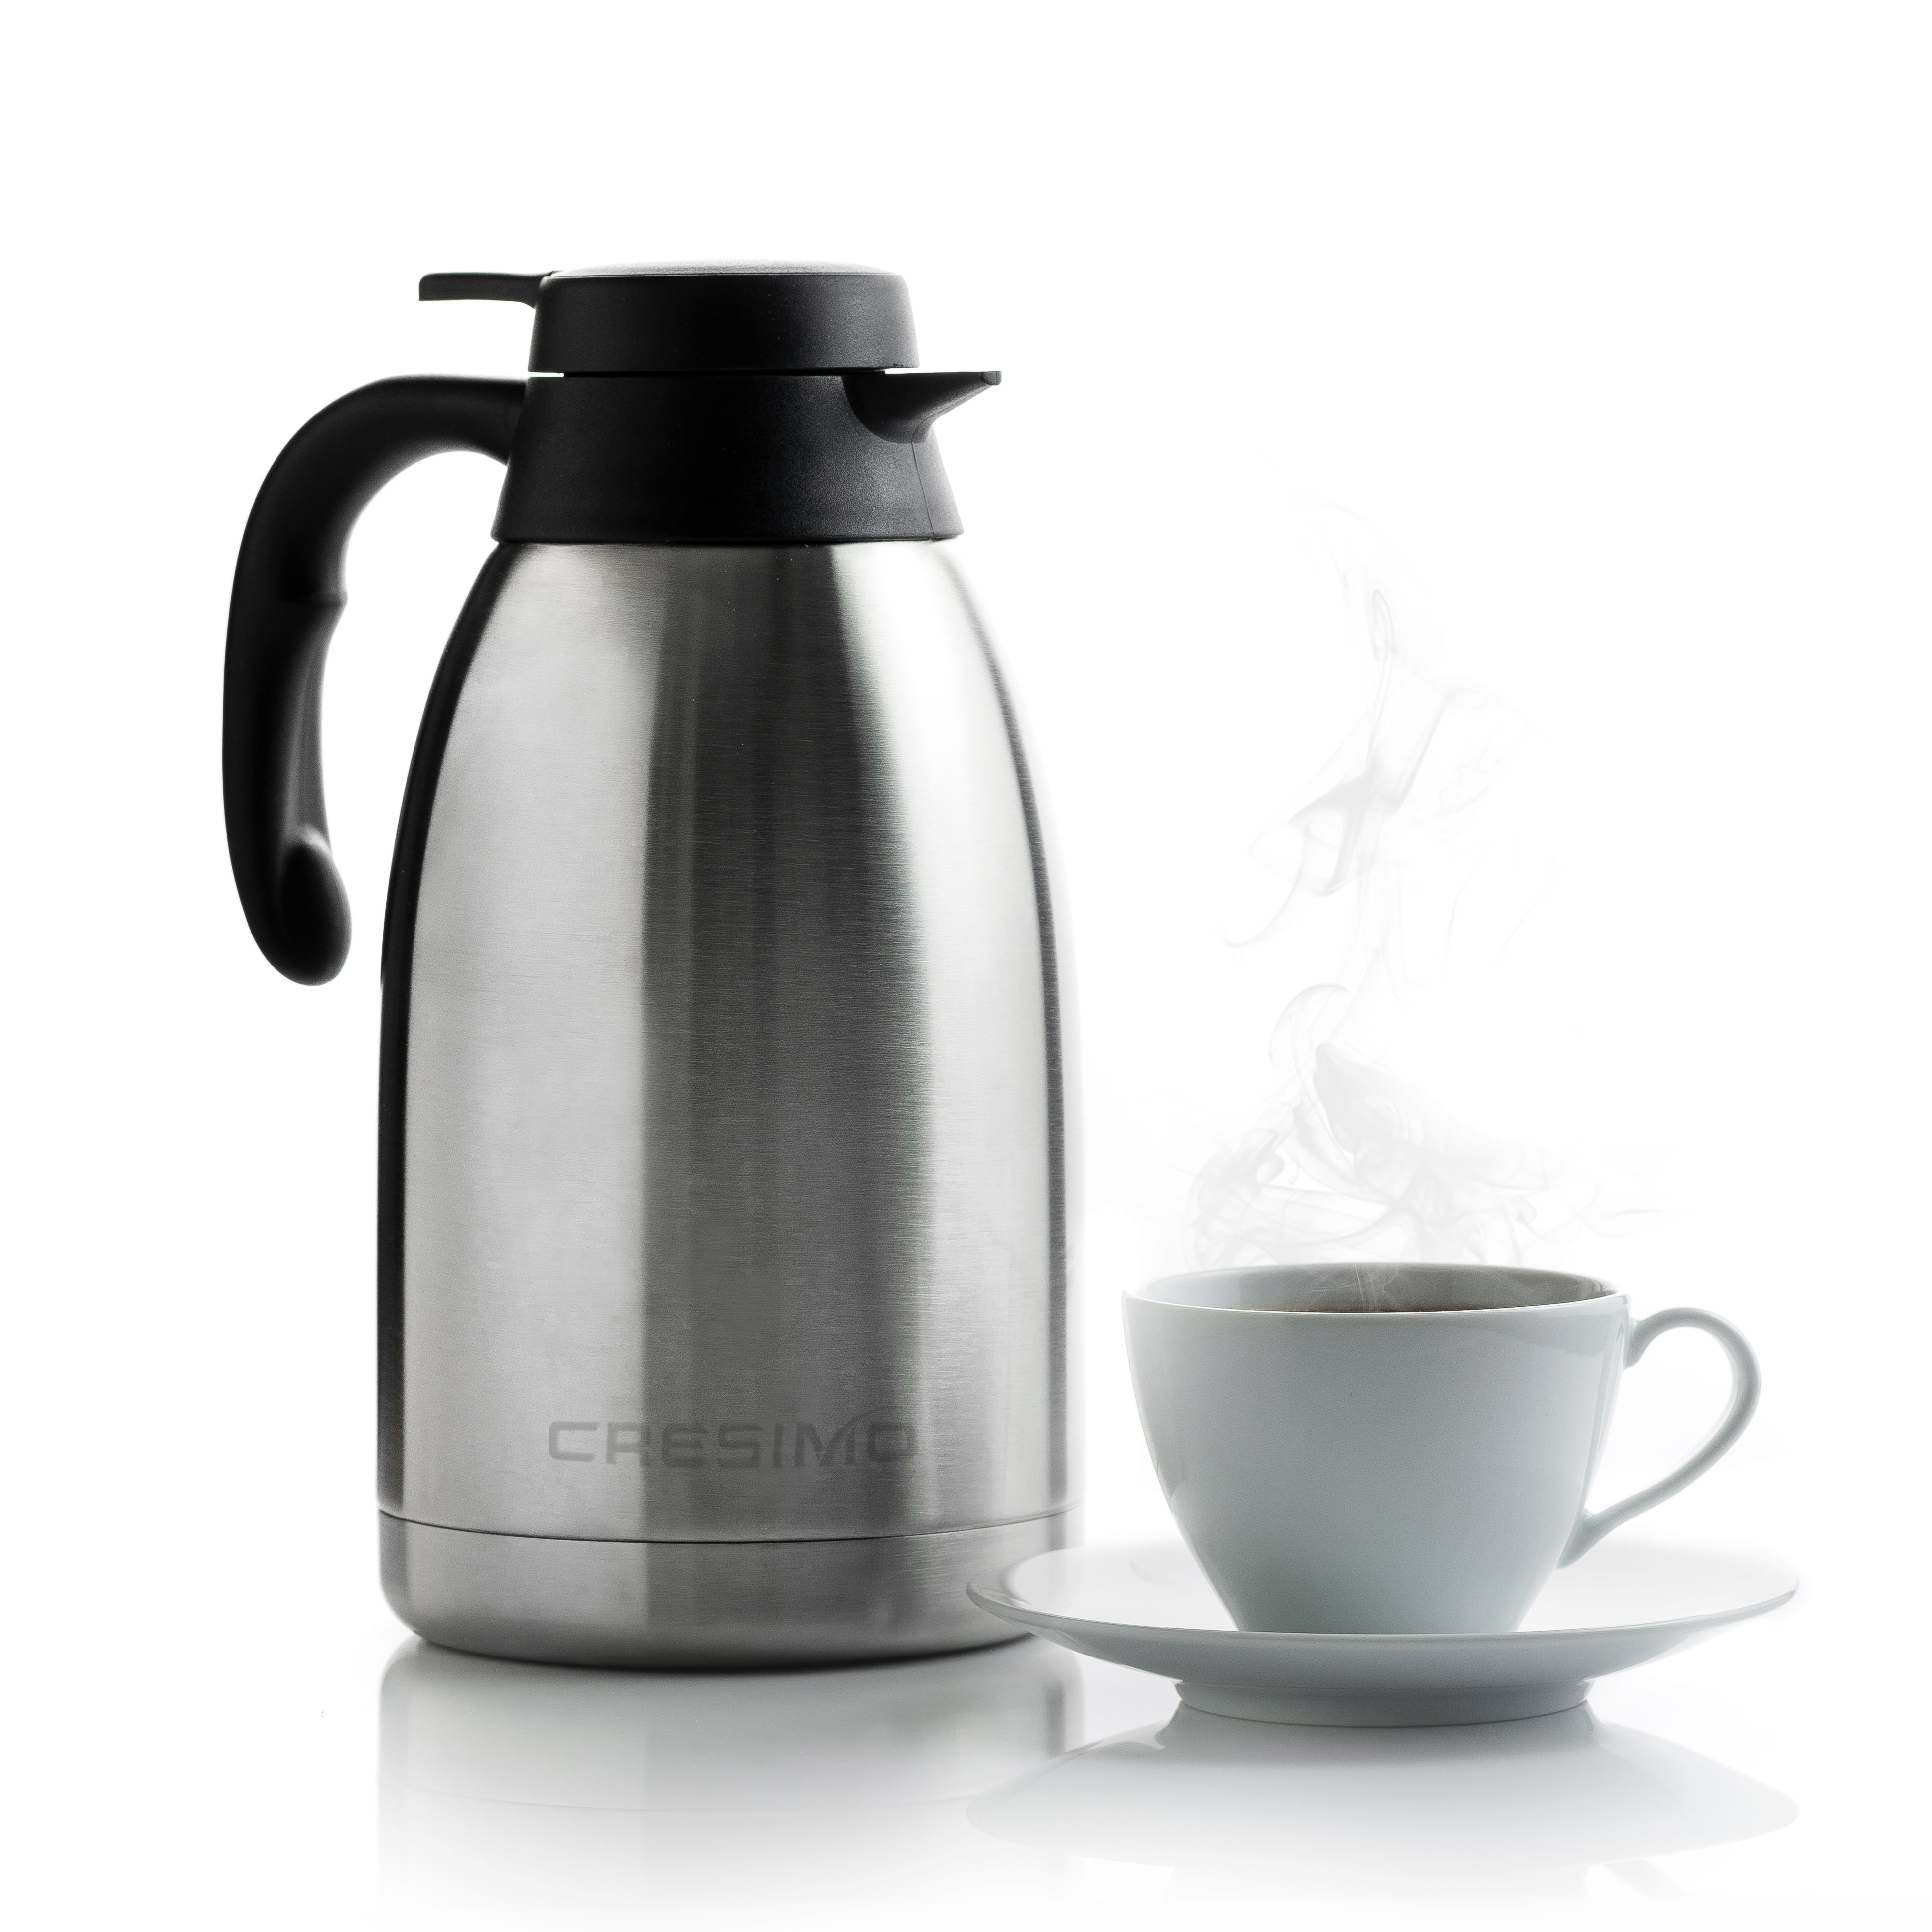 Insulated Vacuum Jug 2 Litre 304 Stainless Steel,Carafe Thermal Pitcher with Lid,Double Walled Vacuum Coffee Pot Insulated Coffee Tea Carafe,24 Hour Heat Retention Color : Gold, Size : 2L